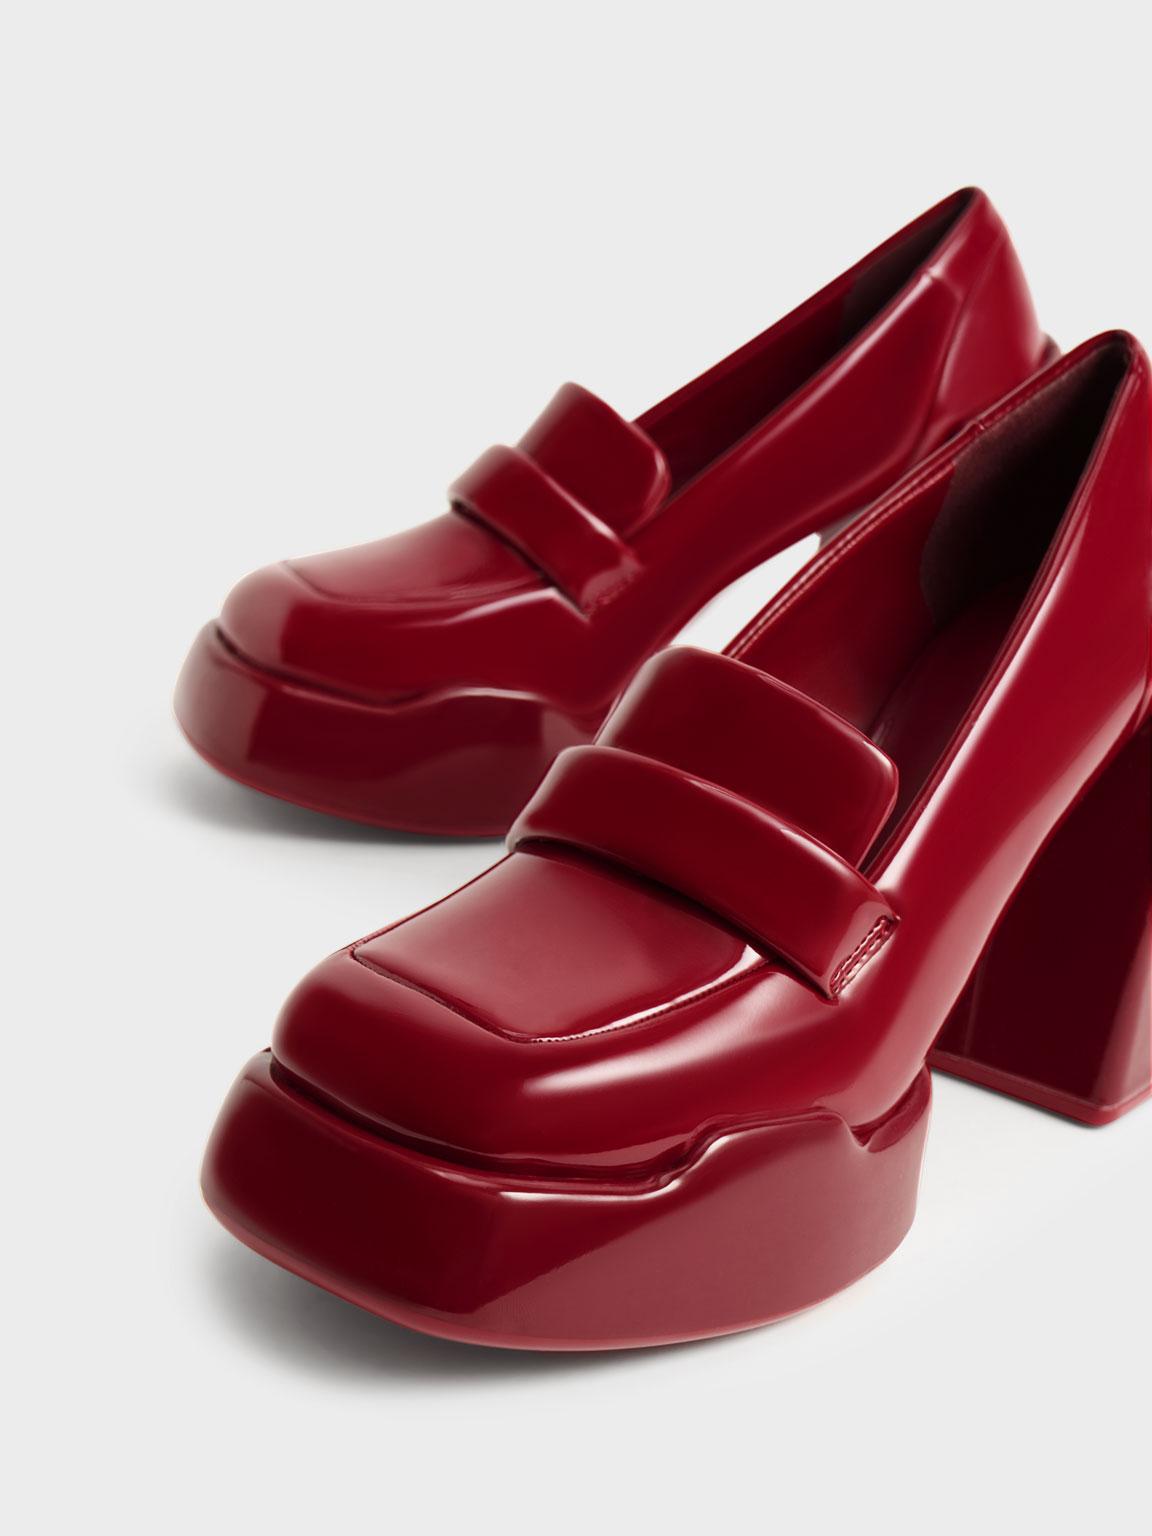 Charles & Keith Lula Patent Loafer Pumps in Red | Lyst